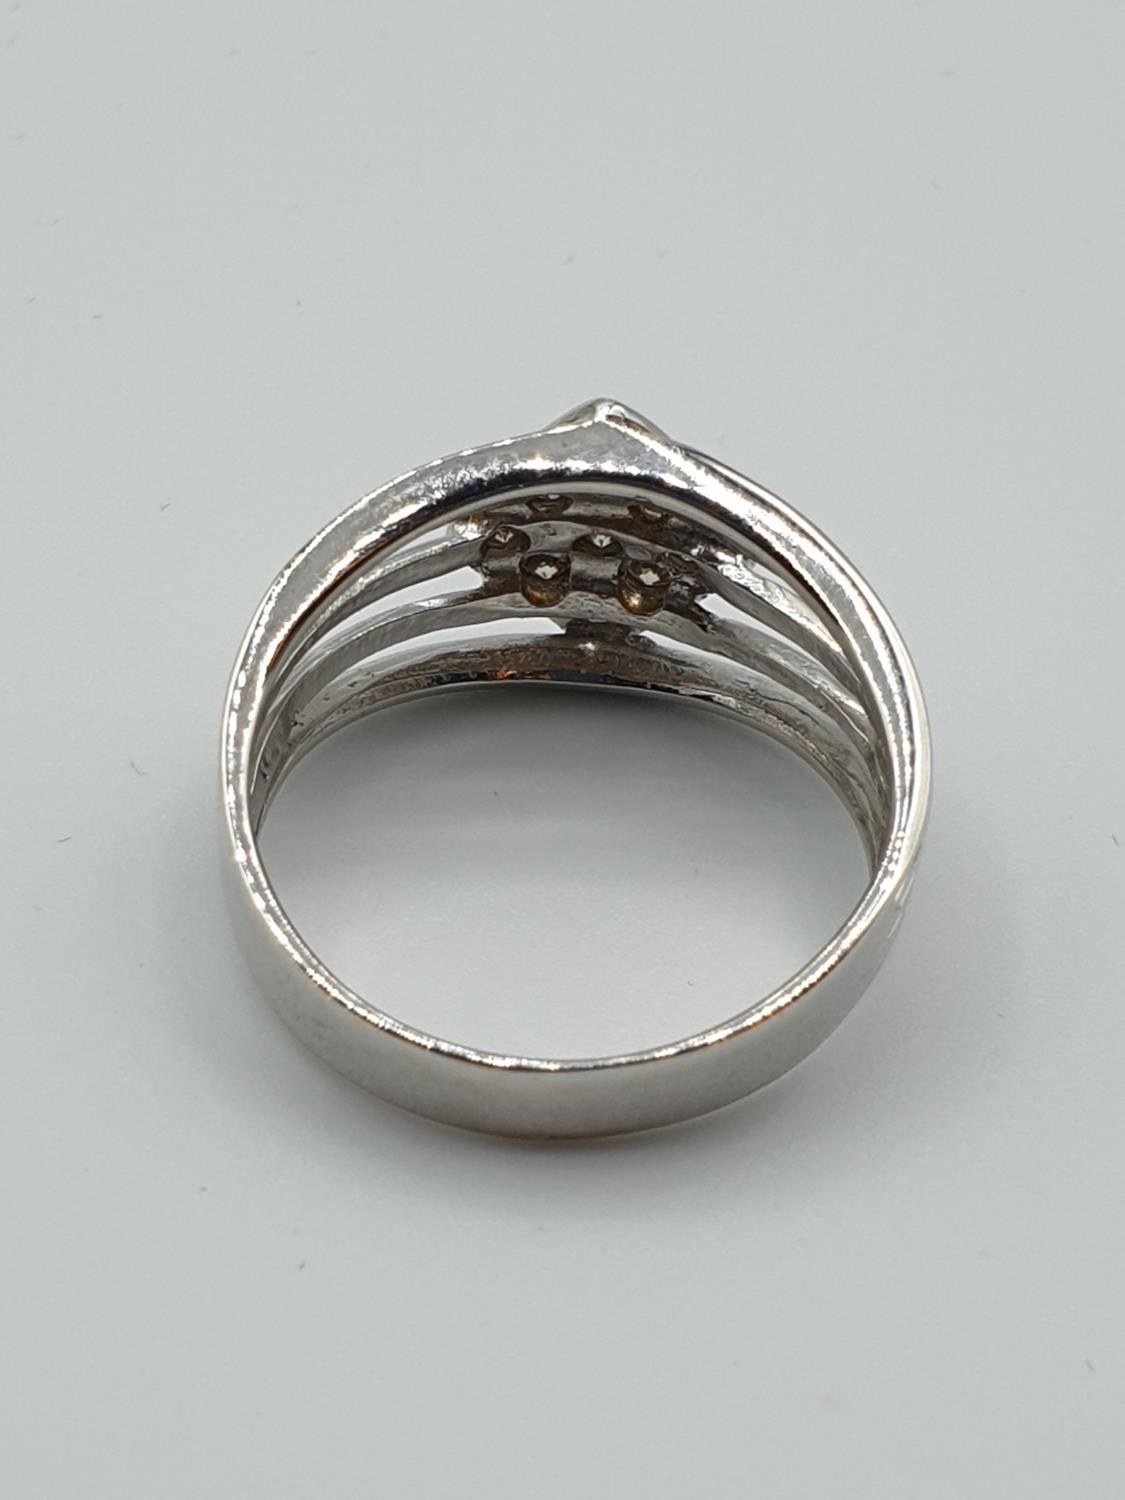 18ct white gold ring with champagne diamonds inset, weight 5g and size Q - Image 4 of 5